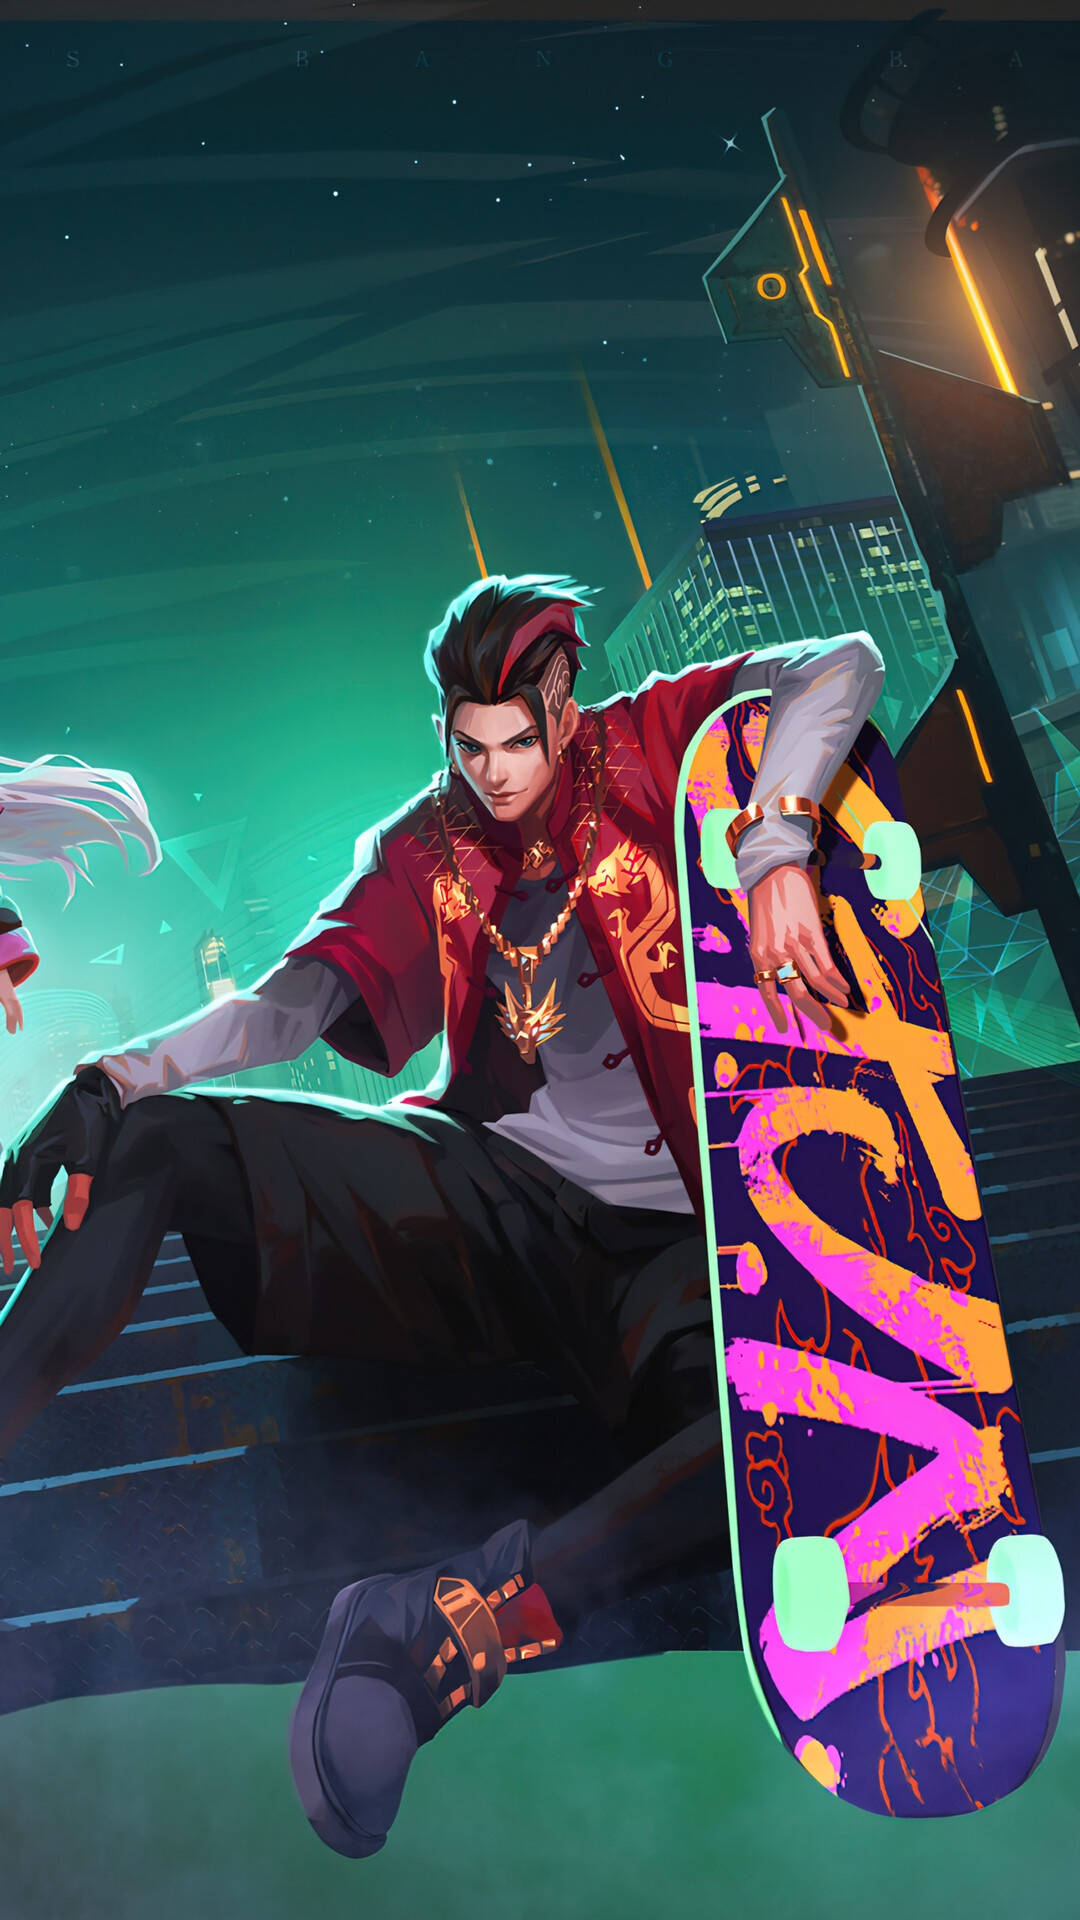 Stunning Wallpaper Featuring Chou From Mobile Legends With His Skateboard